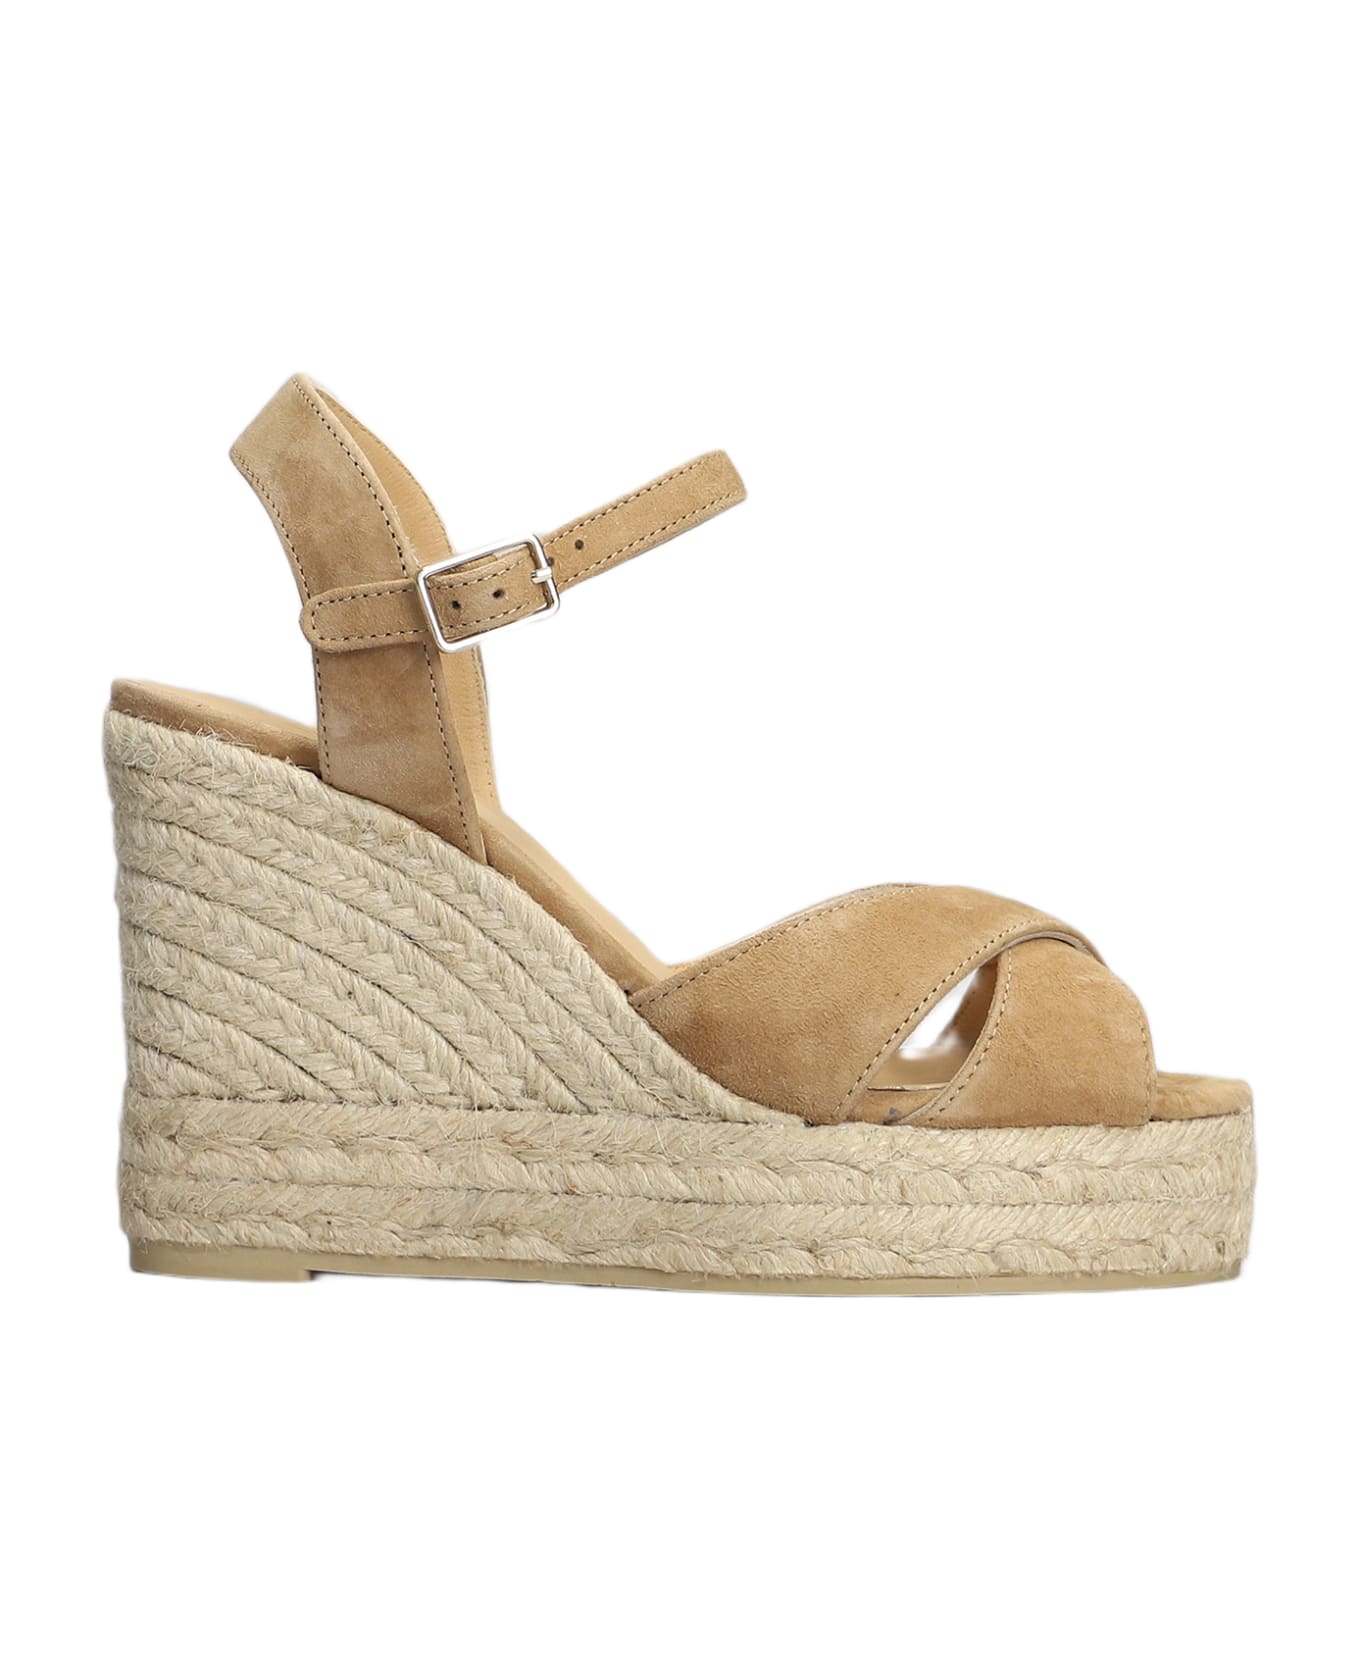 Castañer Blaudell-8ed-007 Wedges In Leather Color Suede - leather color